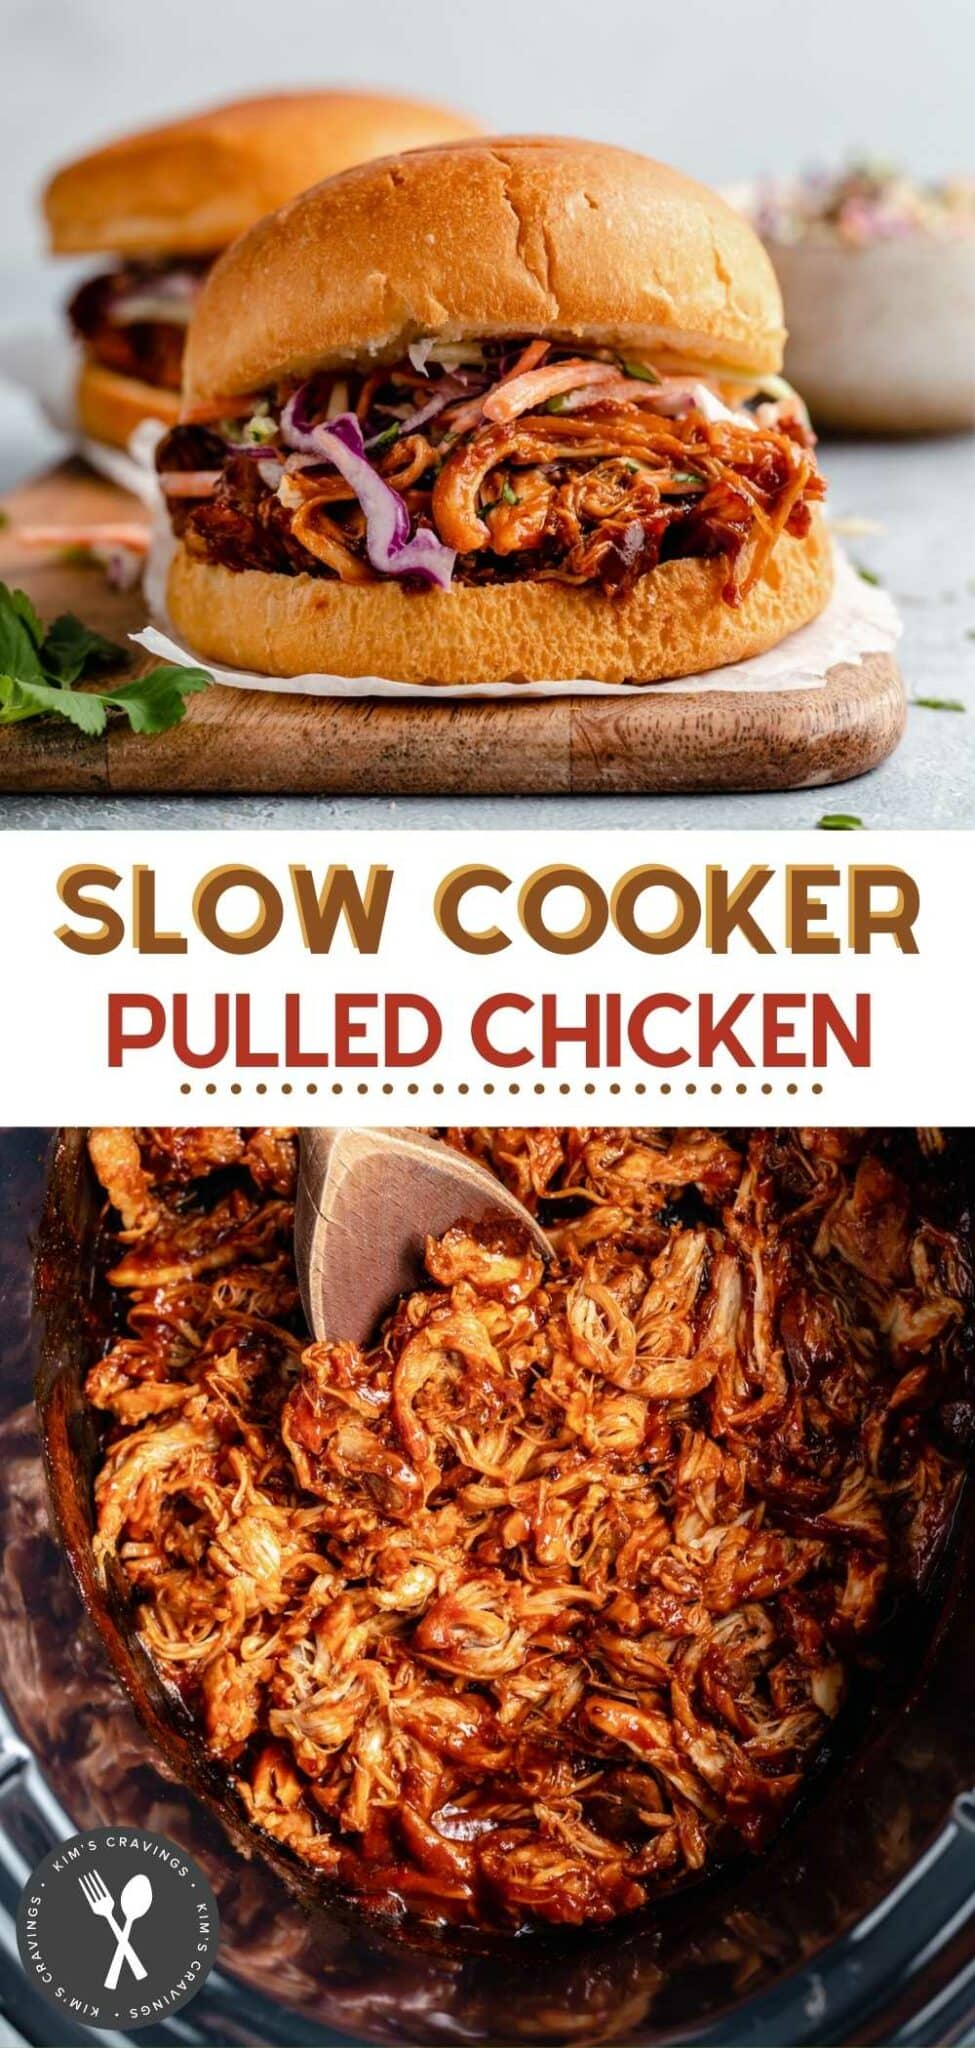 Slow Cooker Pulled Chicken - Kim's Cravings